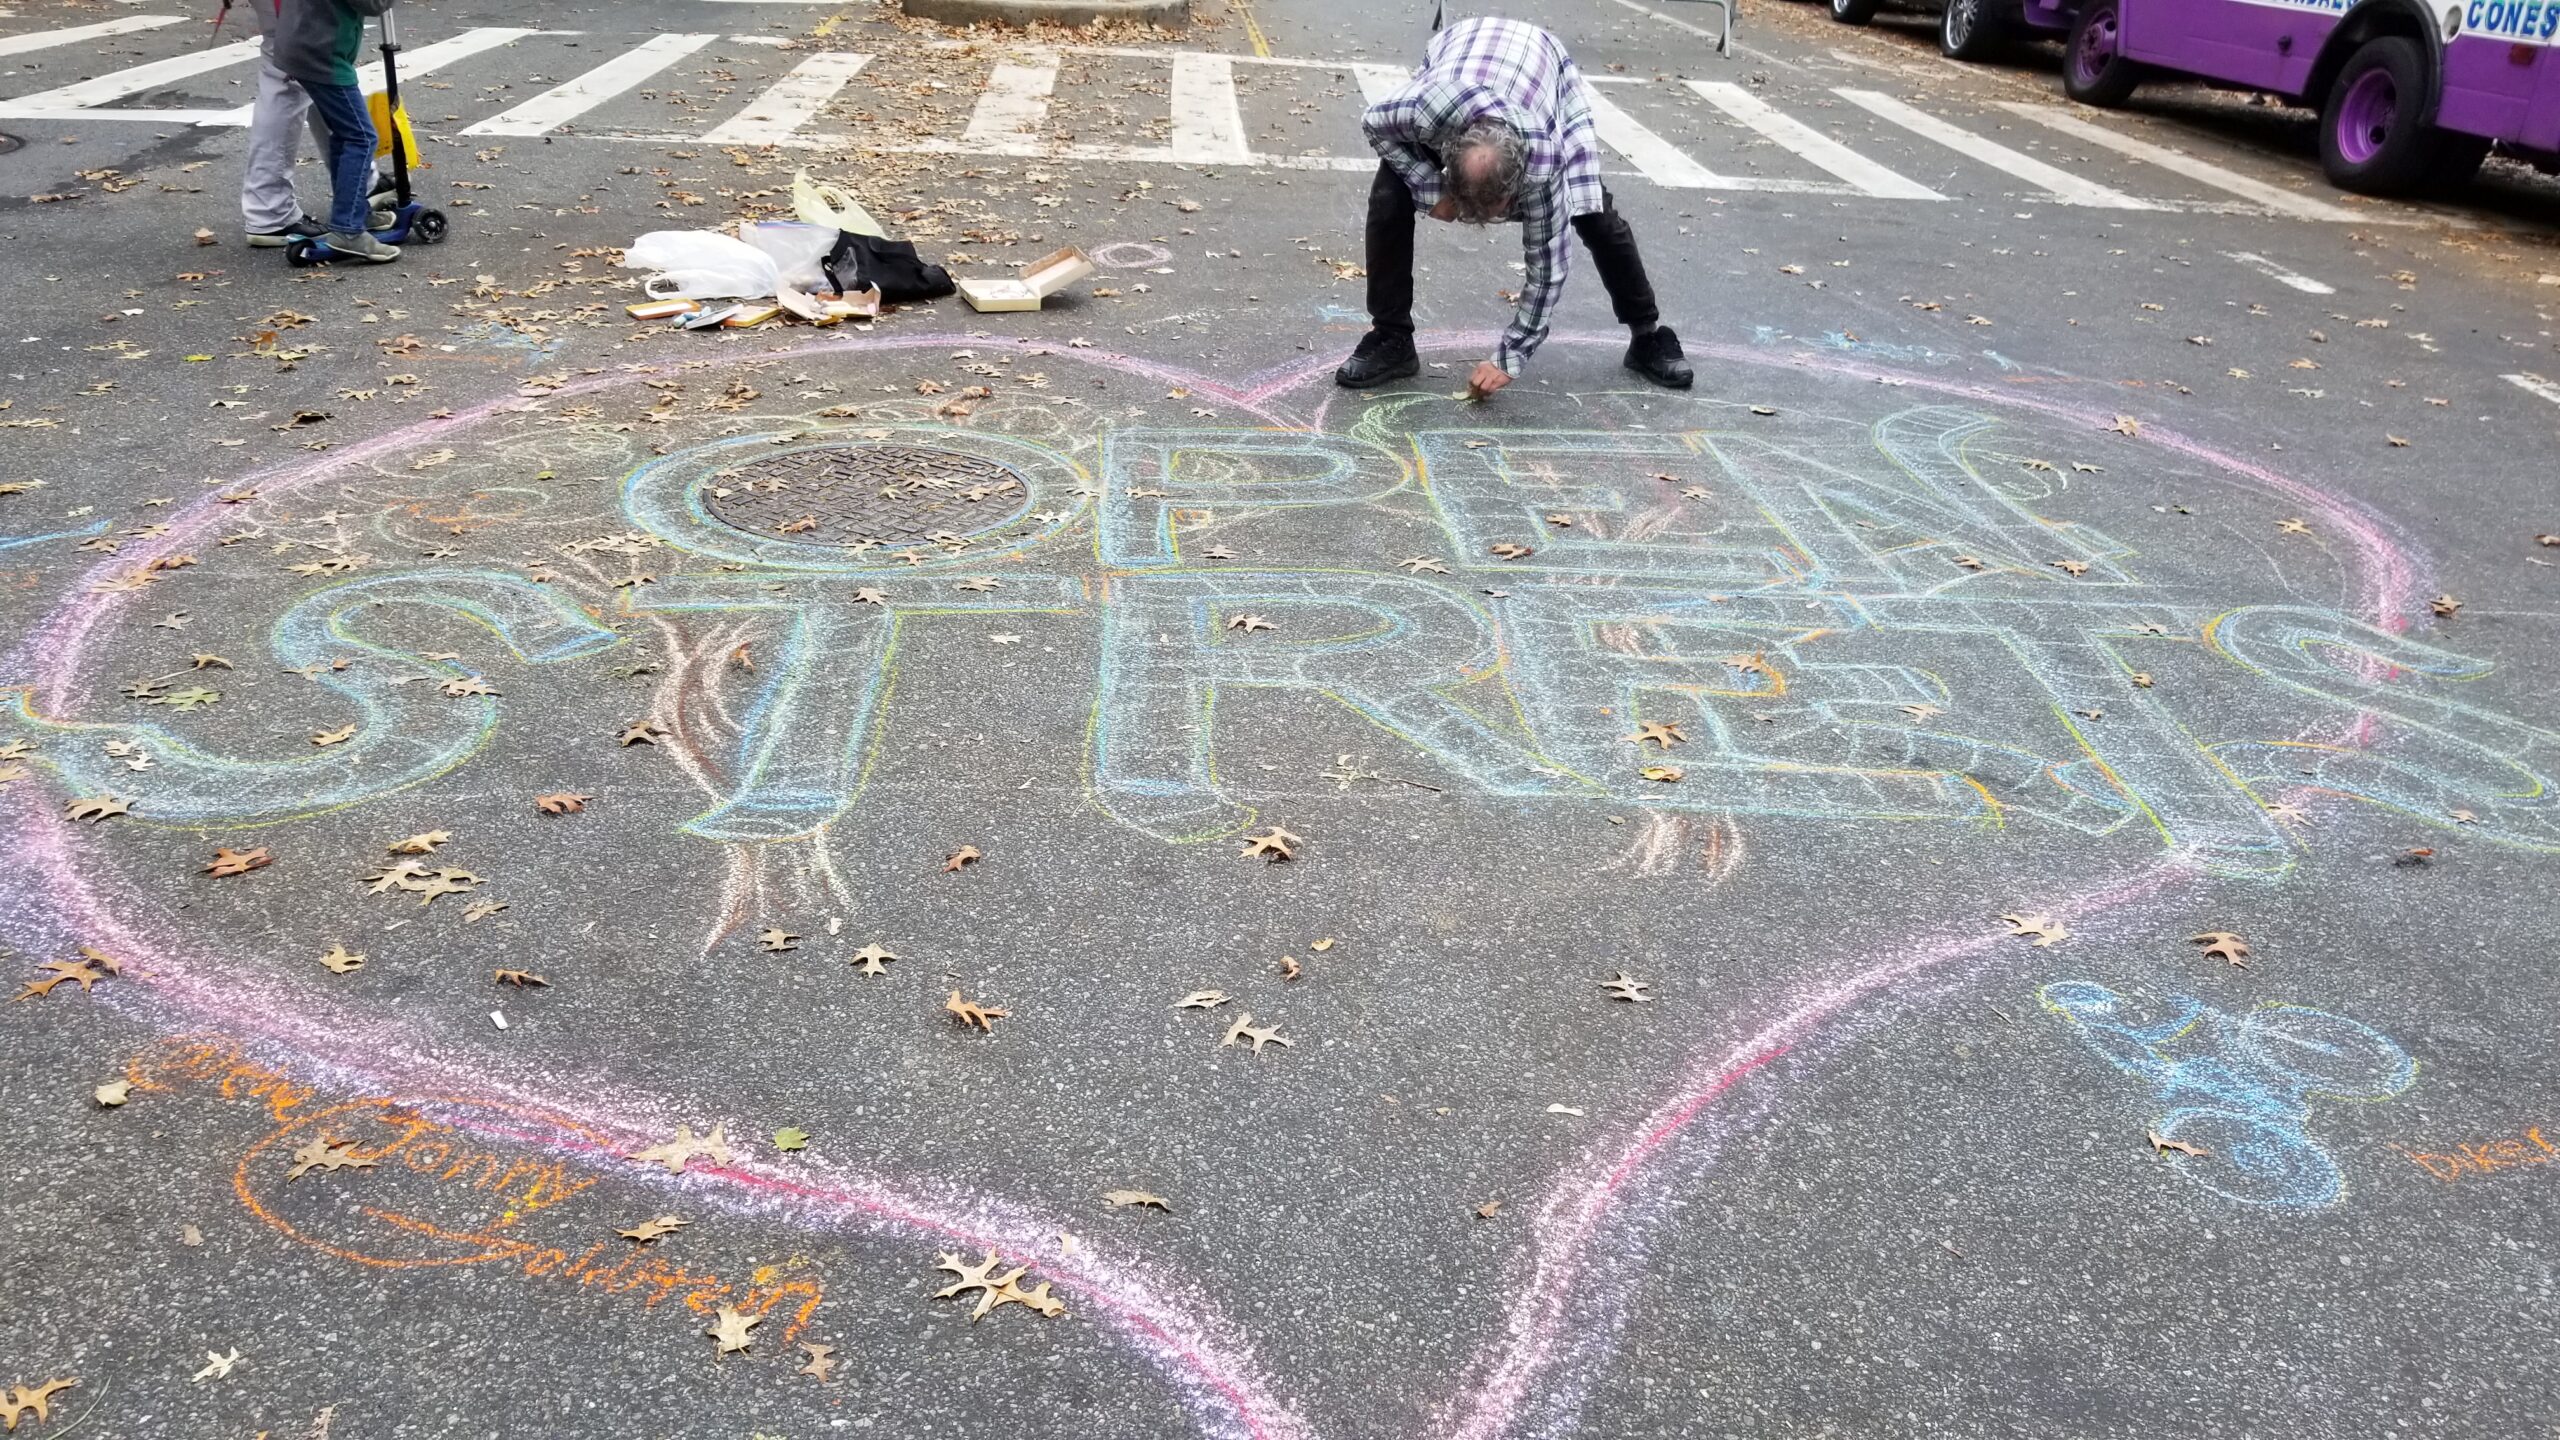 A man is bending down and writing with chalk on 34th Avenue. He is finishing a very large drawing of a heart with the words "Open Streets" inside it, and a drawing of a tree and a person on a bicylce.